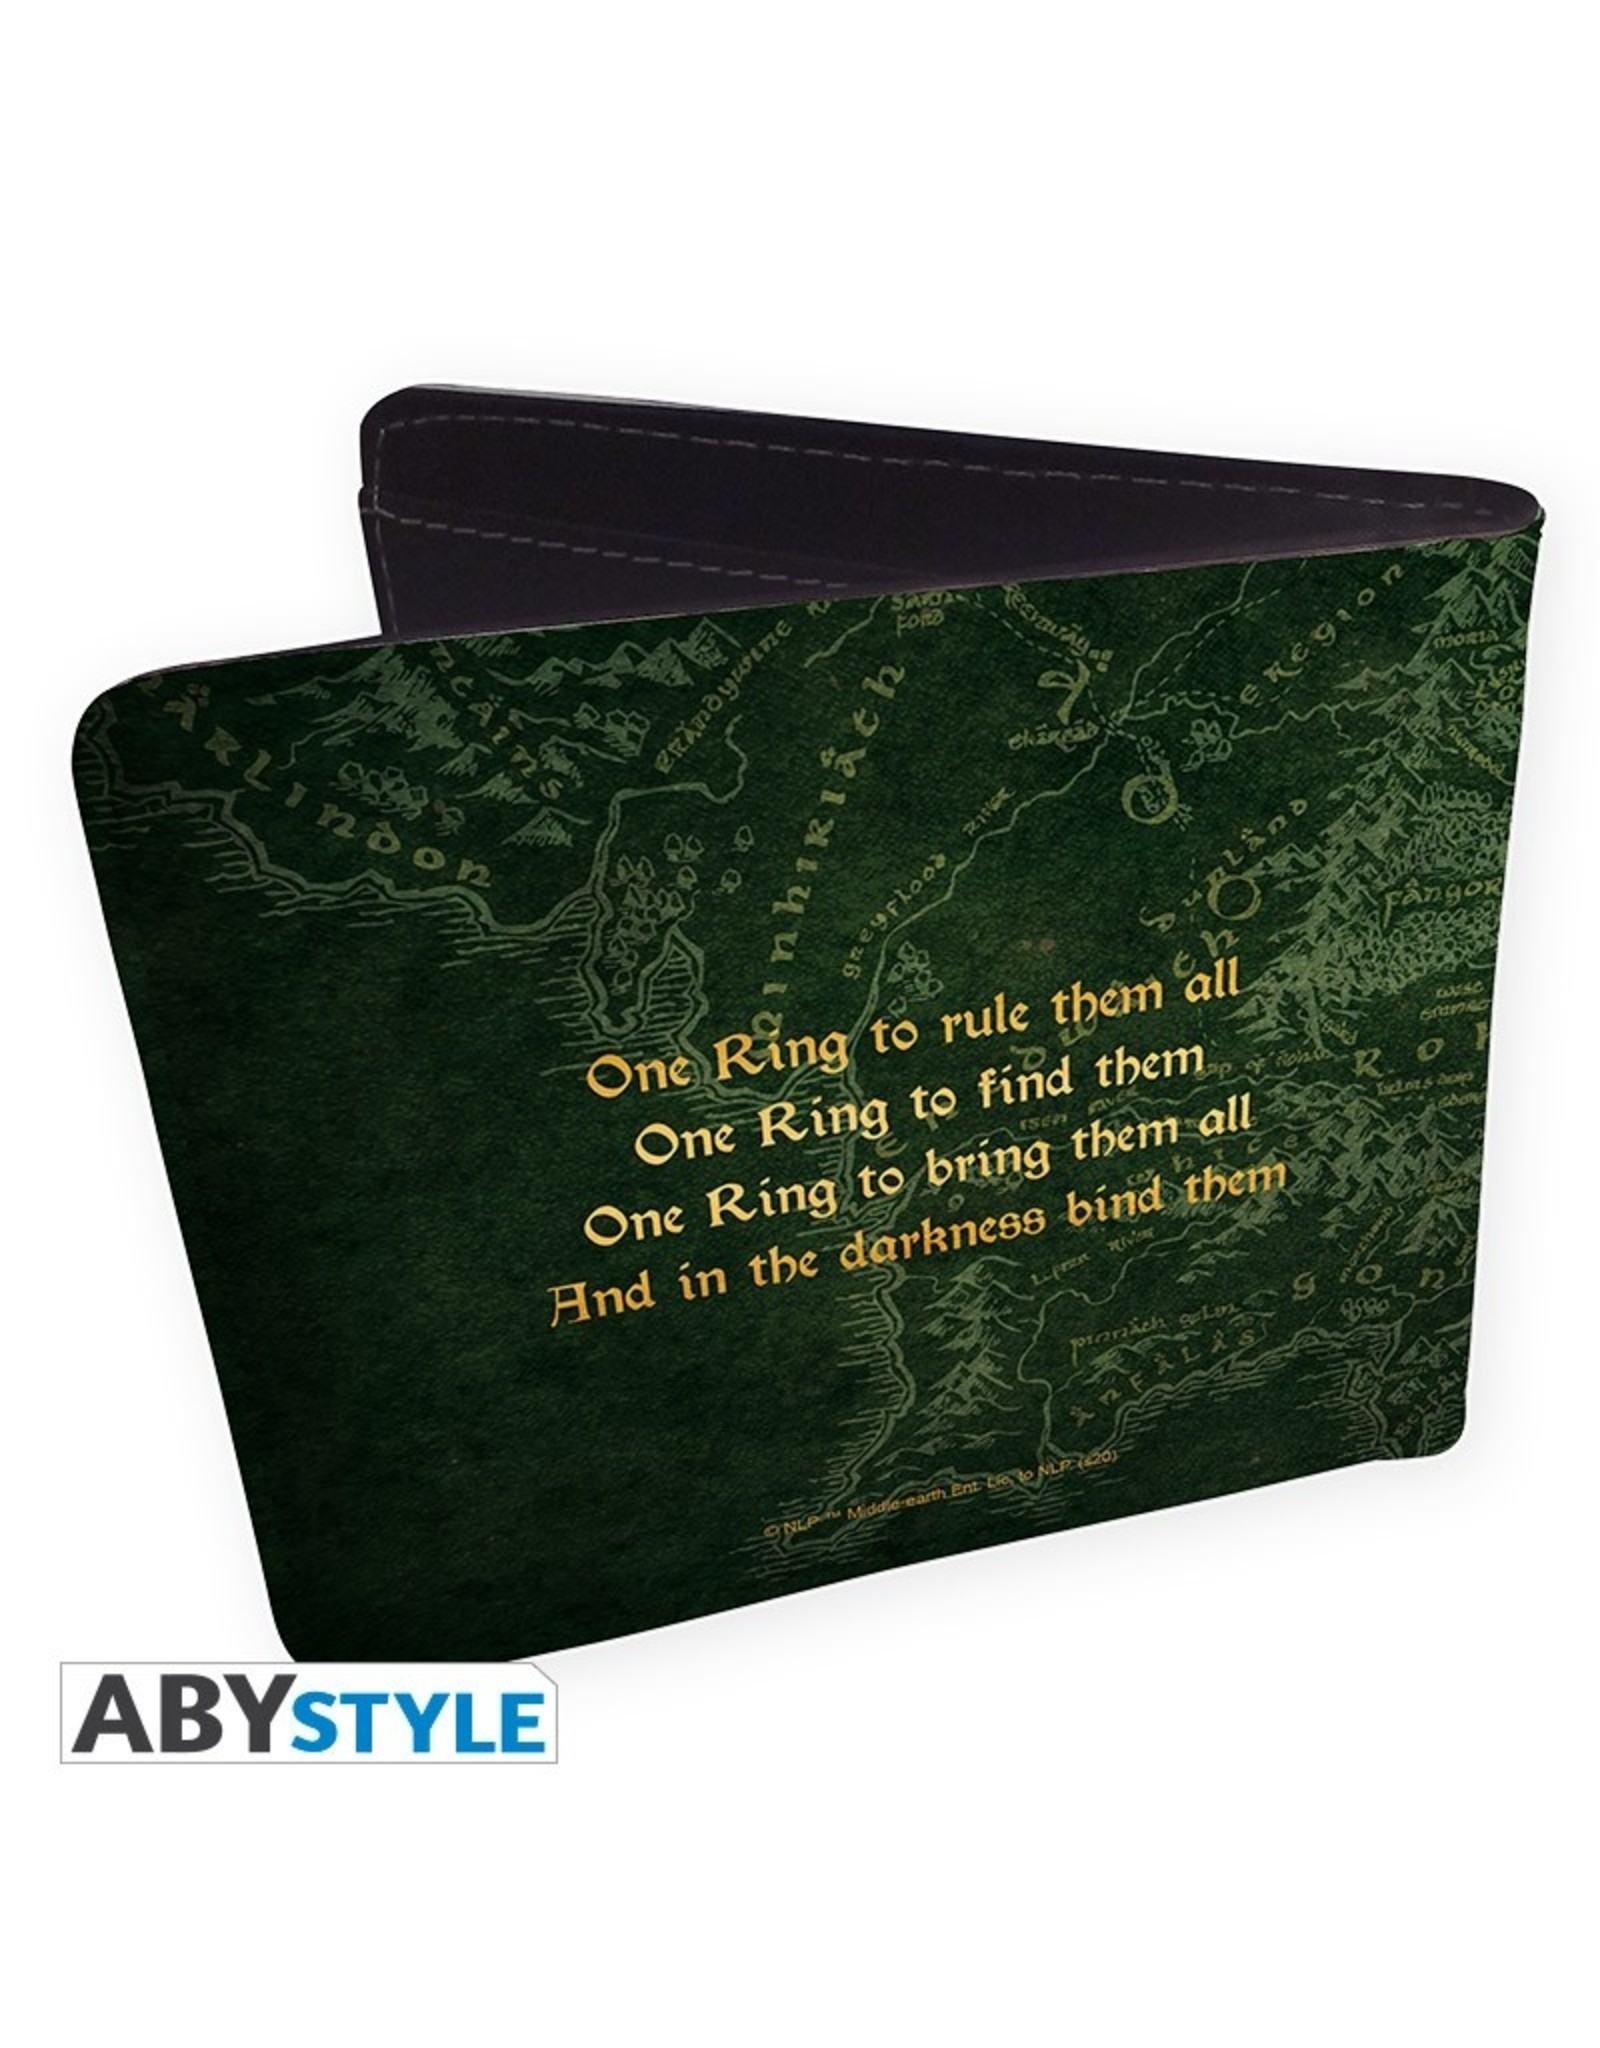 abysse corp Merchandise portemonnees - Lord of the Rings portemonnee middle earth